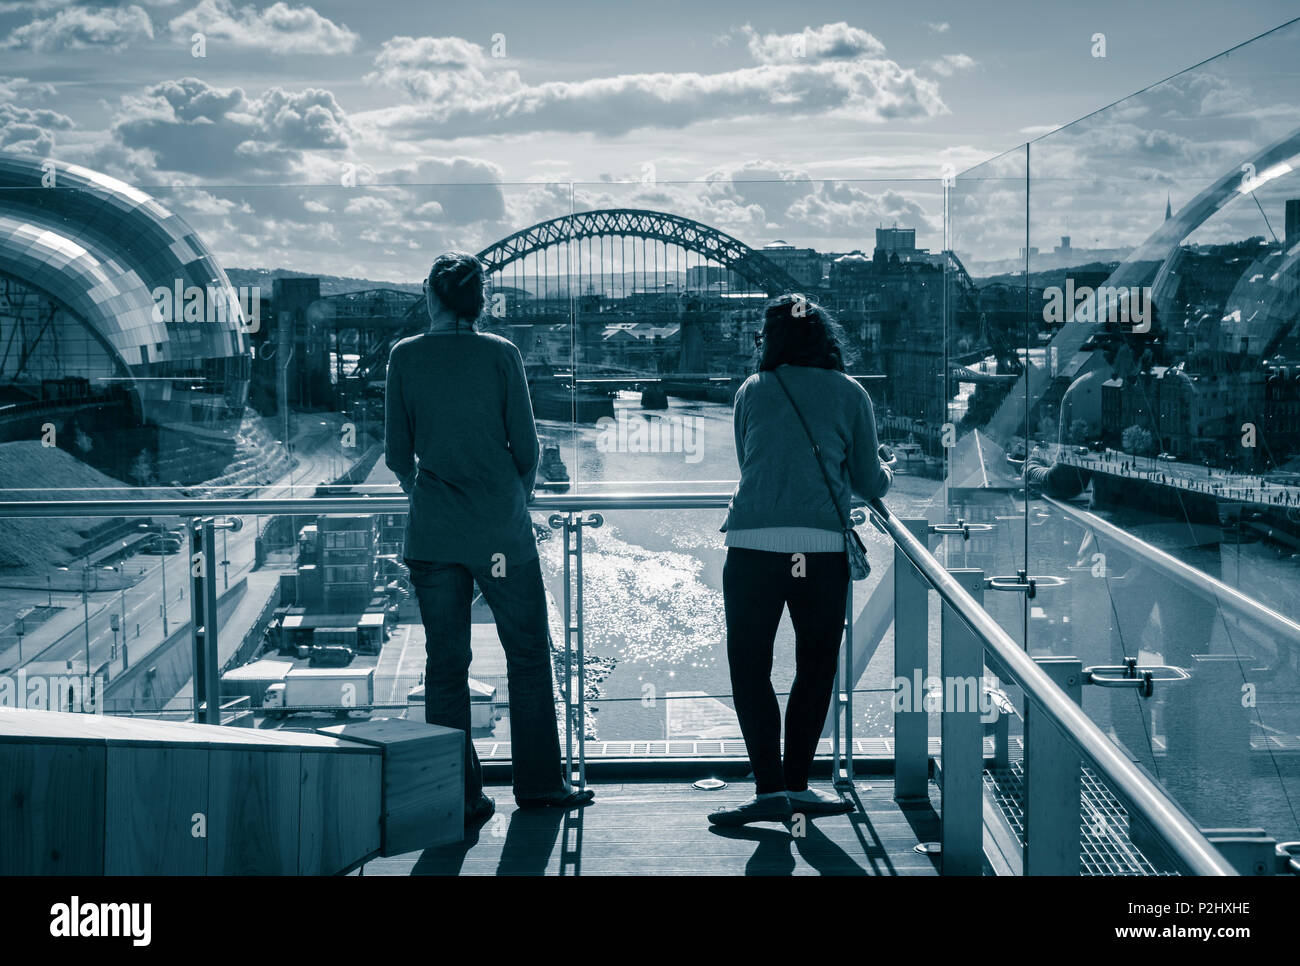 View over the River Tyne towards The Gateshead Sage and Tyne Bridge from viewing platform in BALTIC Centre for Contemporary Art. Gateshead. UK Stock Photo